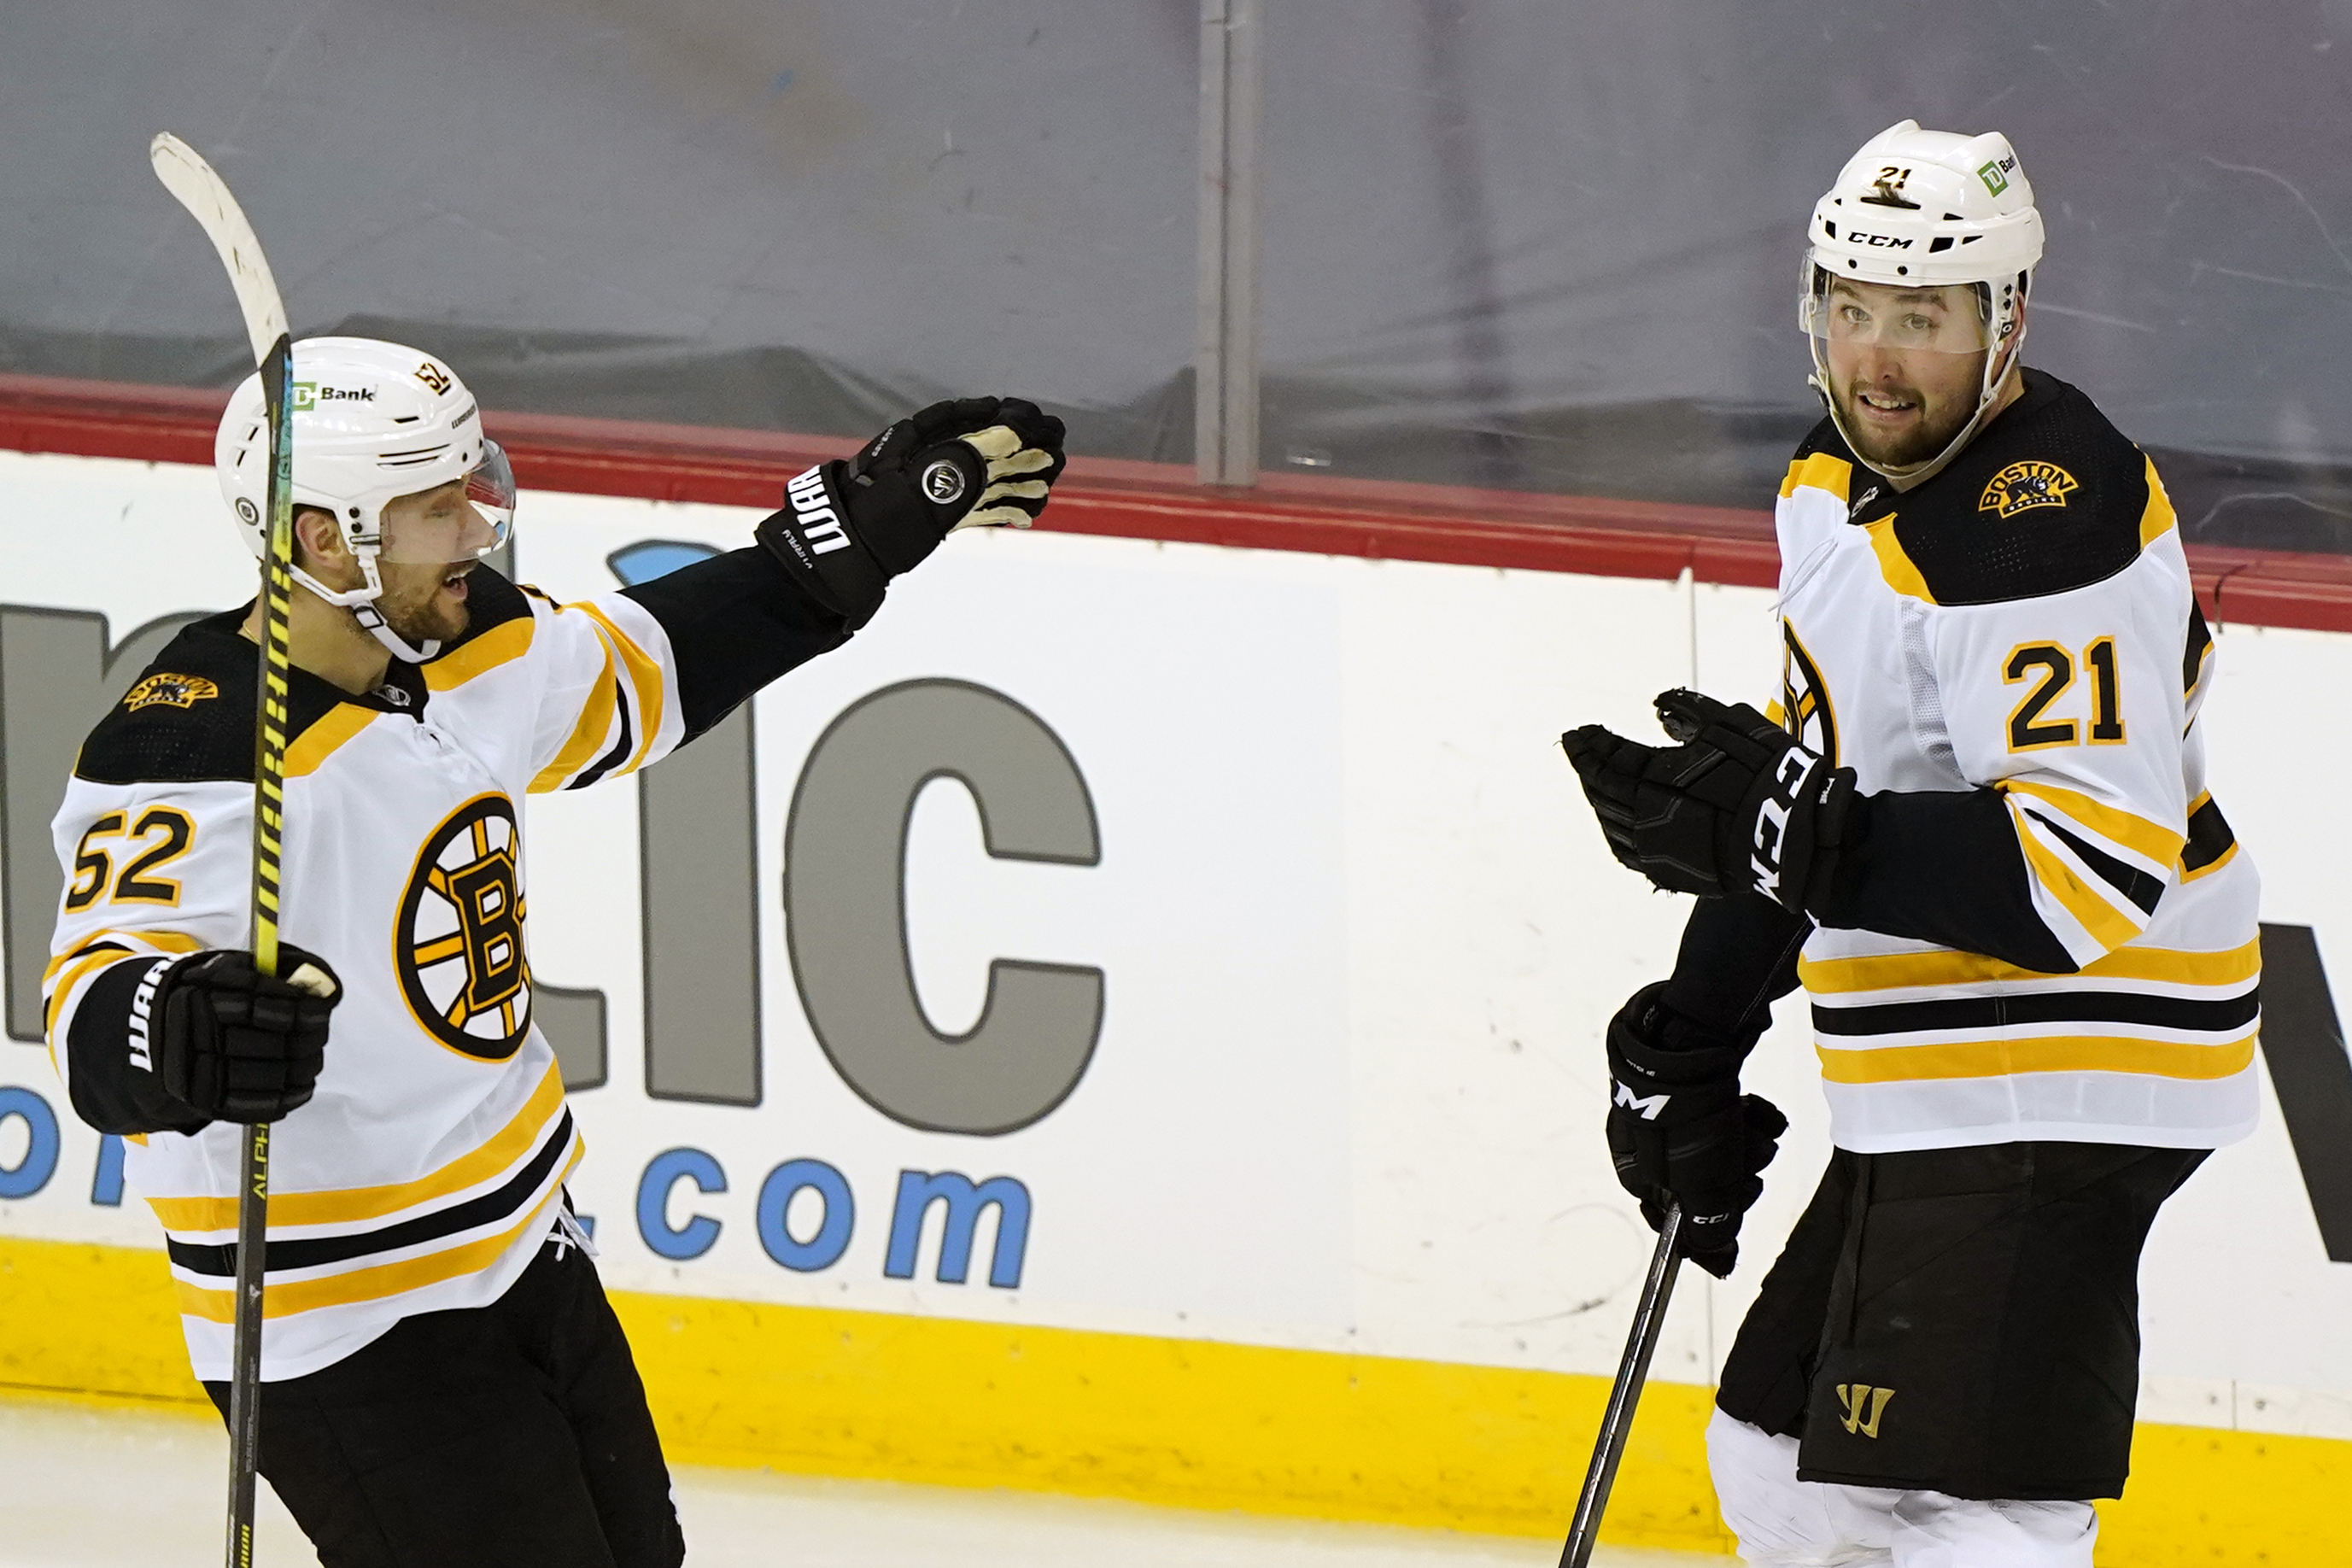 Bruins clinch a playoff berth with a 3-0 victory over the Devils